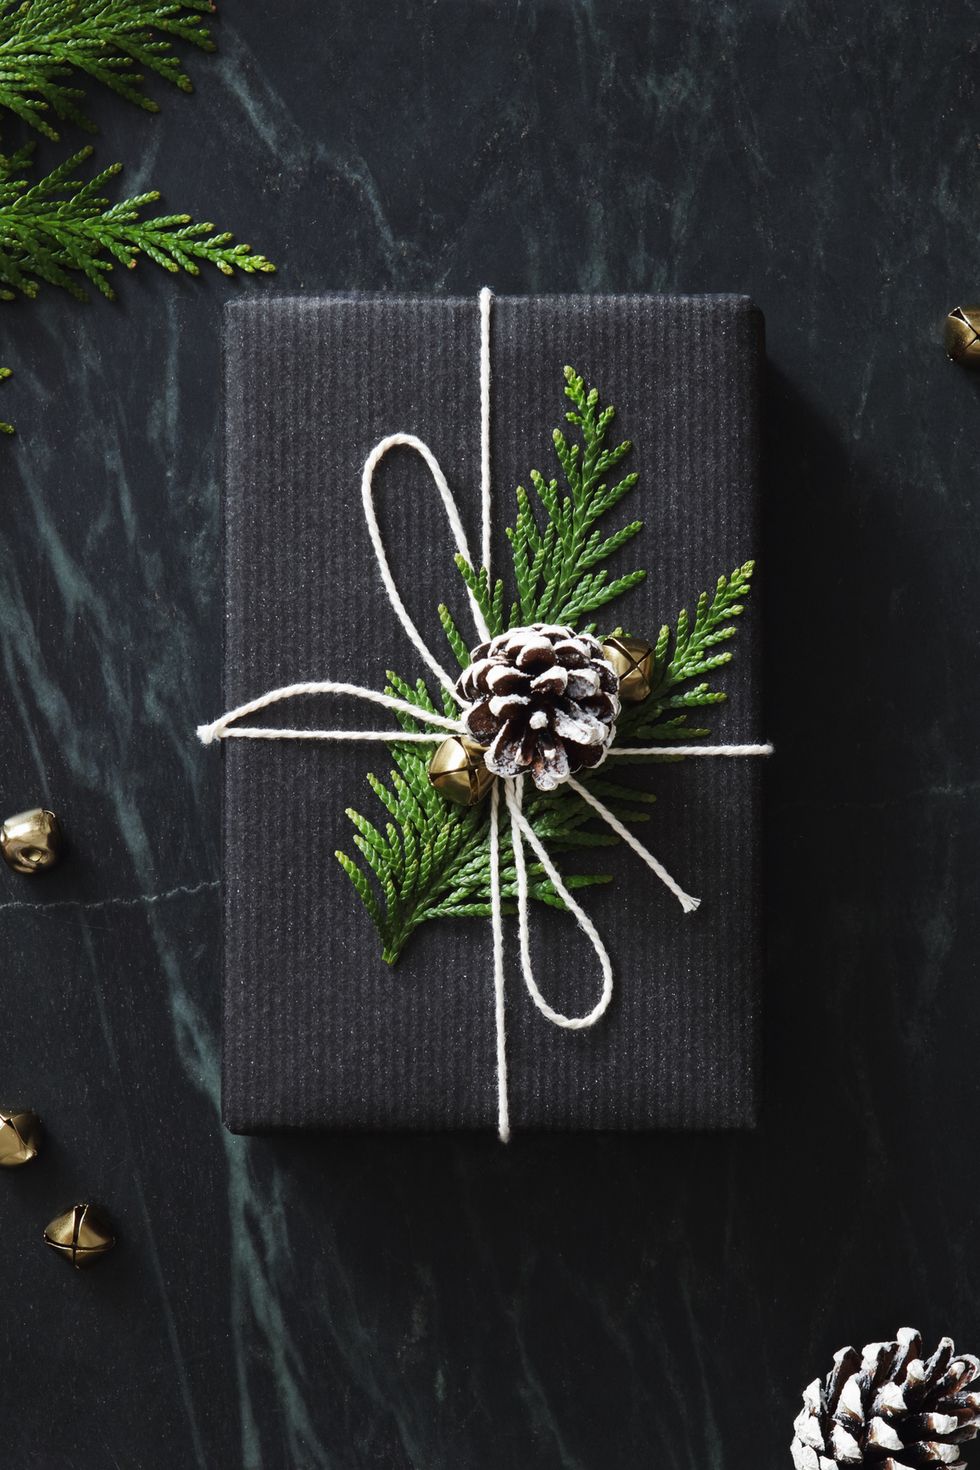 https://hips.hearstapps.com/hmg-prod/images/christmas-present-wrapped-in-black-paper-royalty-free-image-1600109628.jpg?crop=0.66667xw:1xh;center,top&resize=980:*